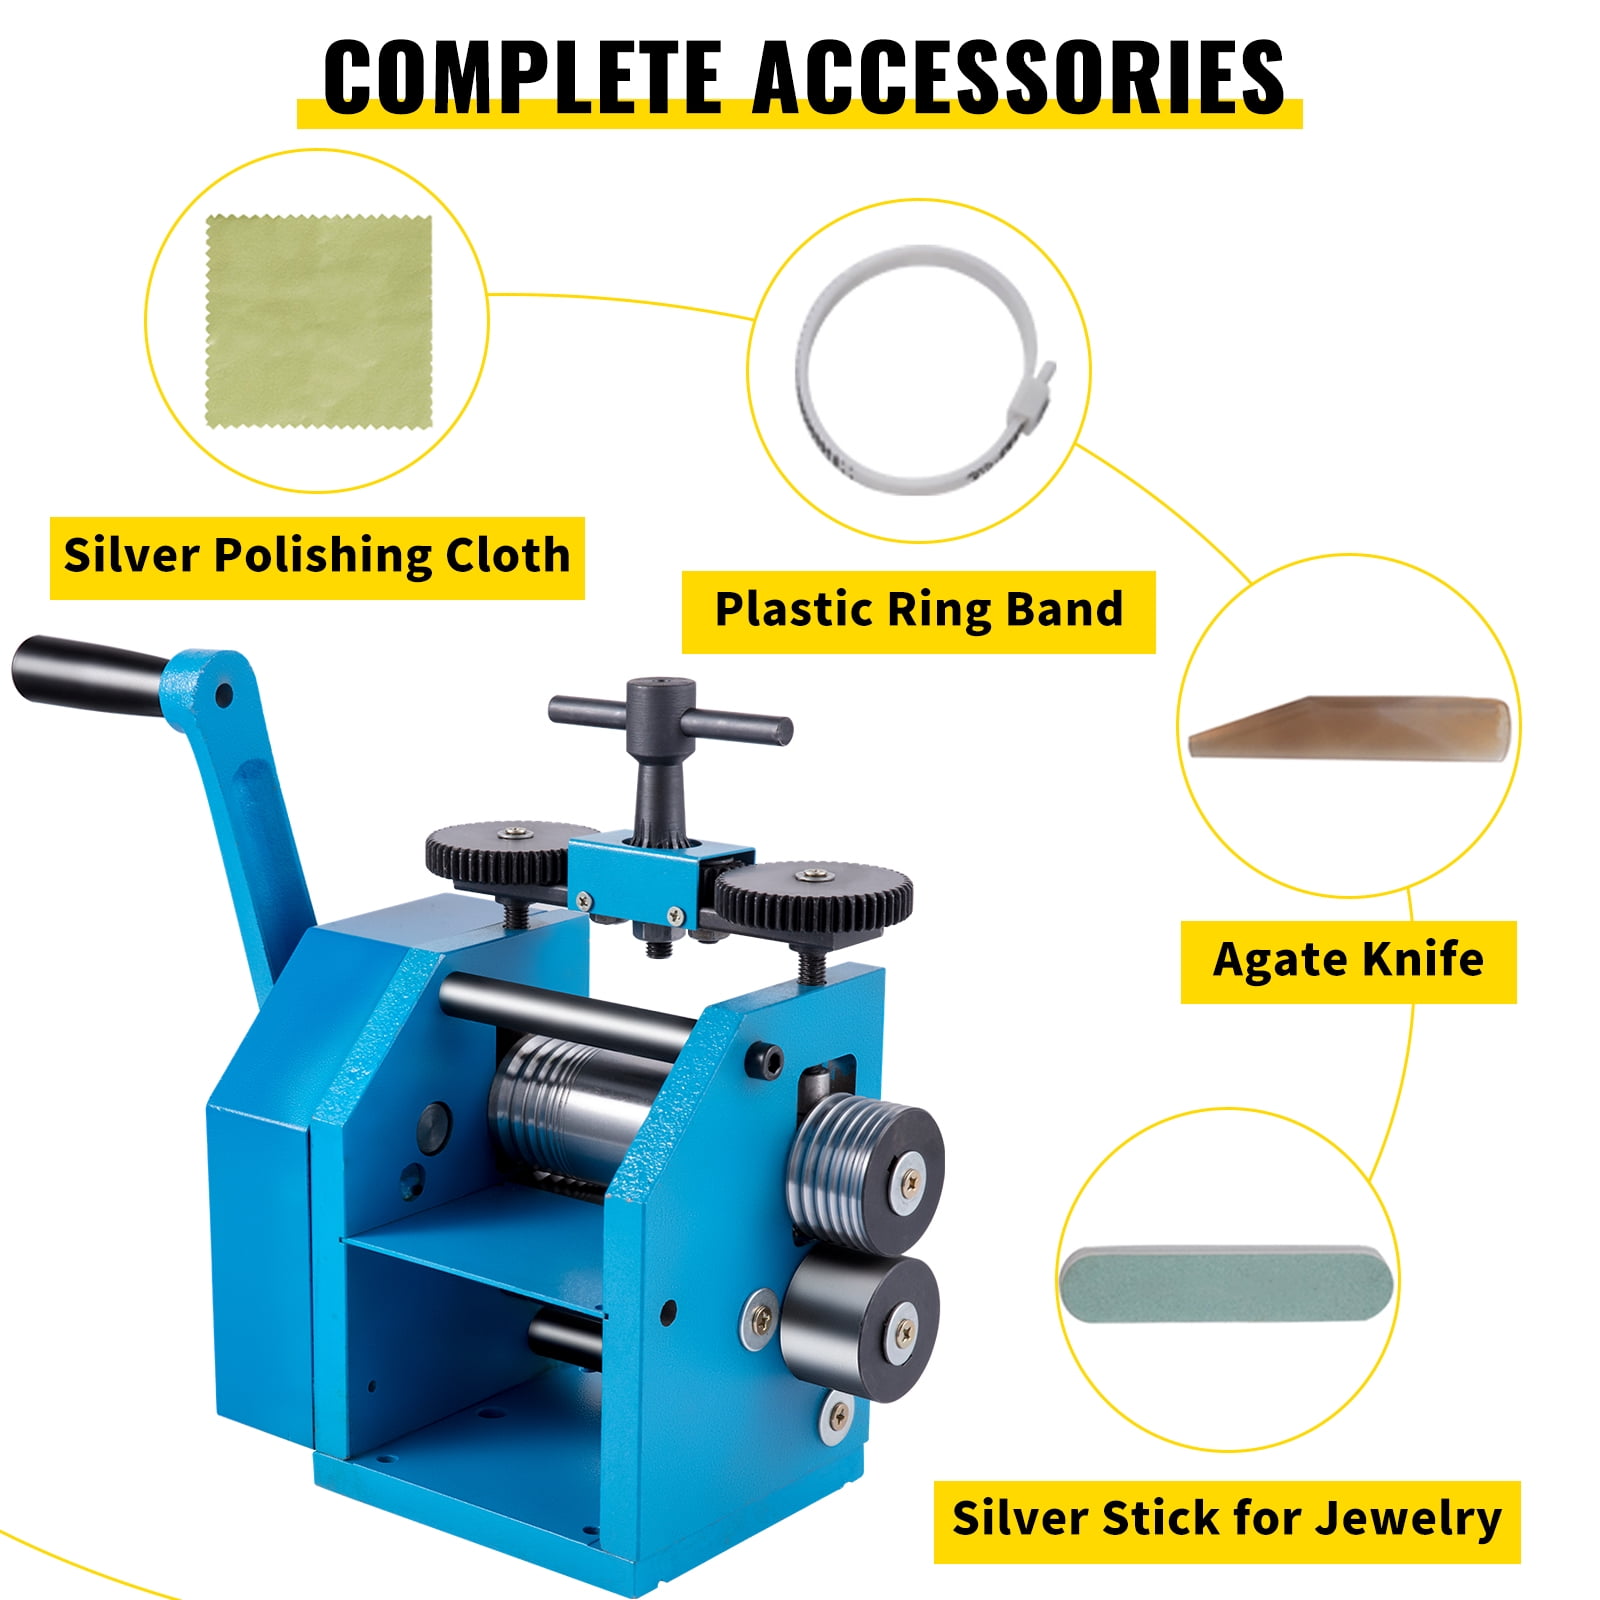 Rolling Mill 4.4/112mm Jewelry Rolling Mill Machine Gear Ratio 1:2.5 Wire Roller  Mill 0.1-7mm Press Thickness For Jewelry Sheet - AliExpress